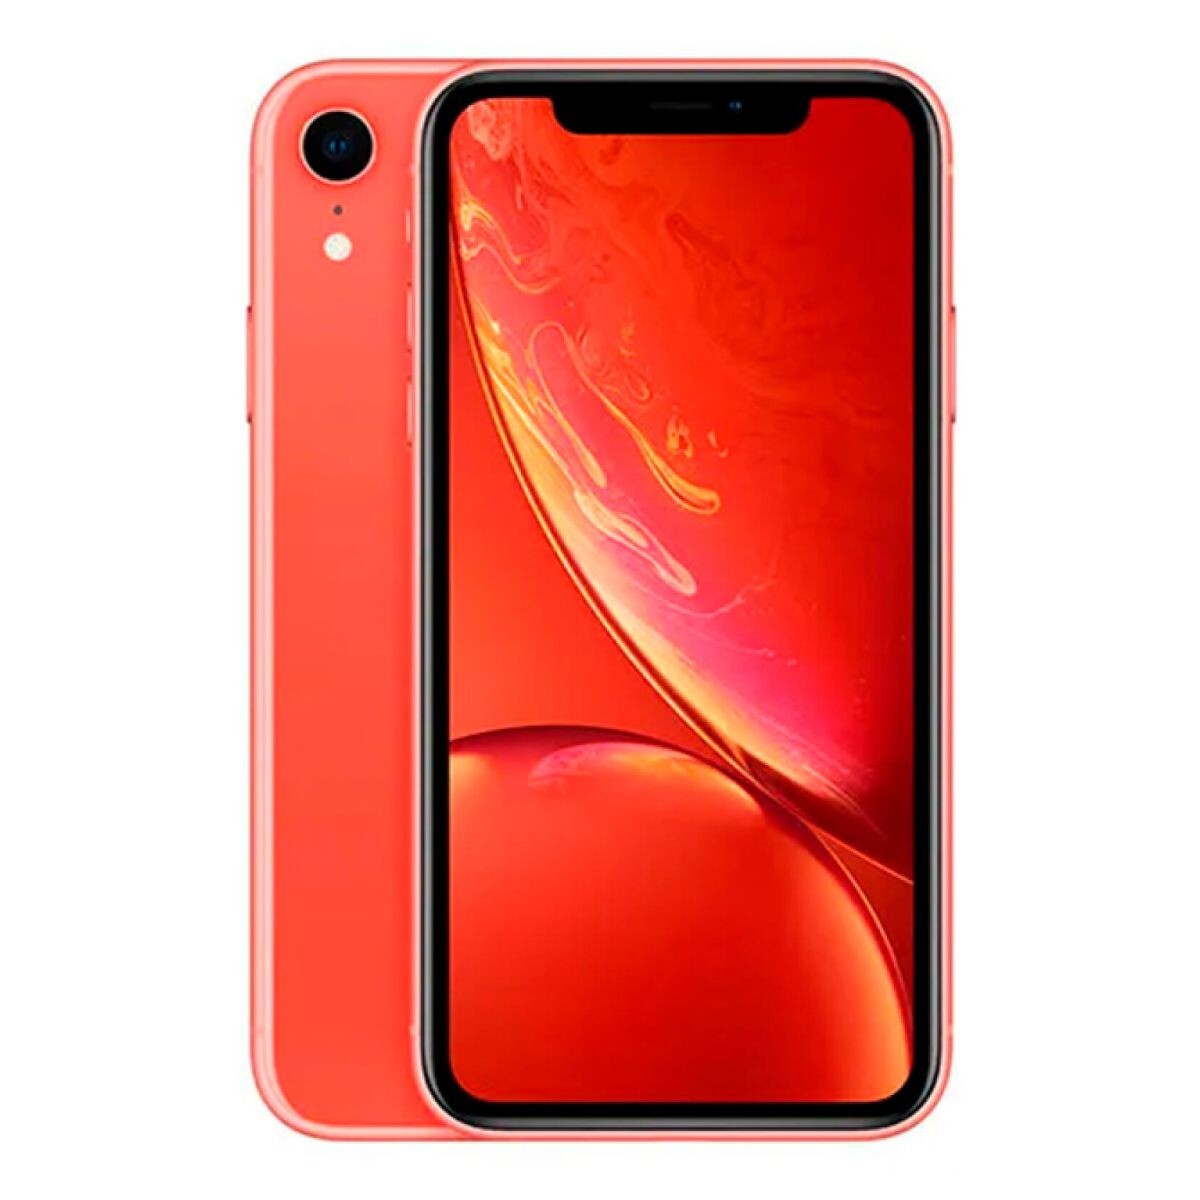 Iphone Xr 64 GB - CORAL 